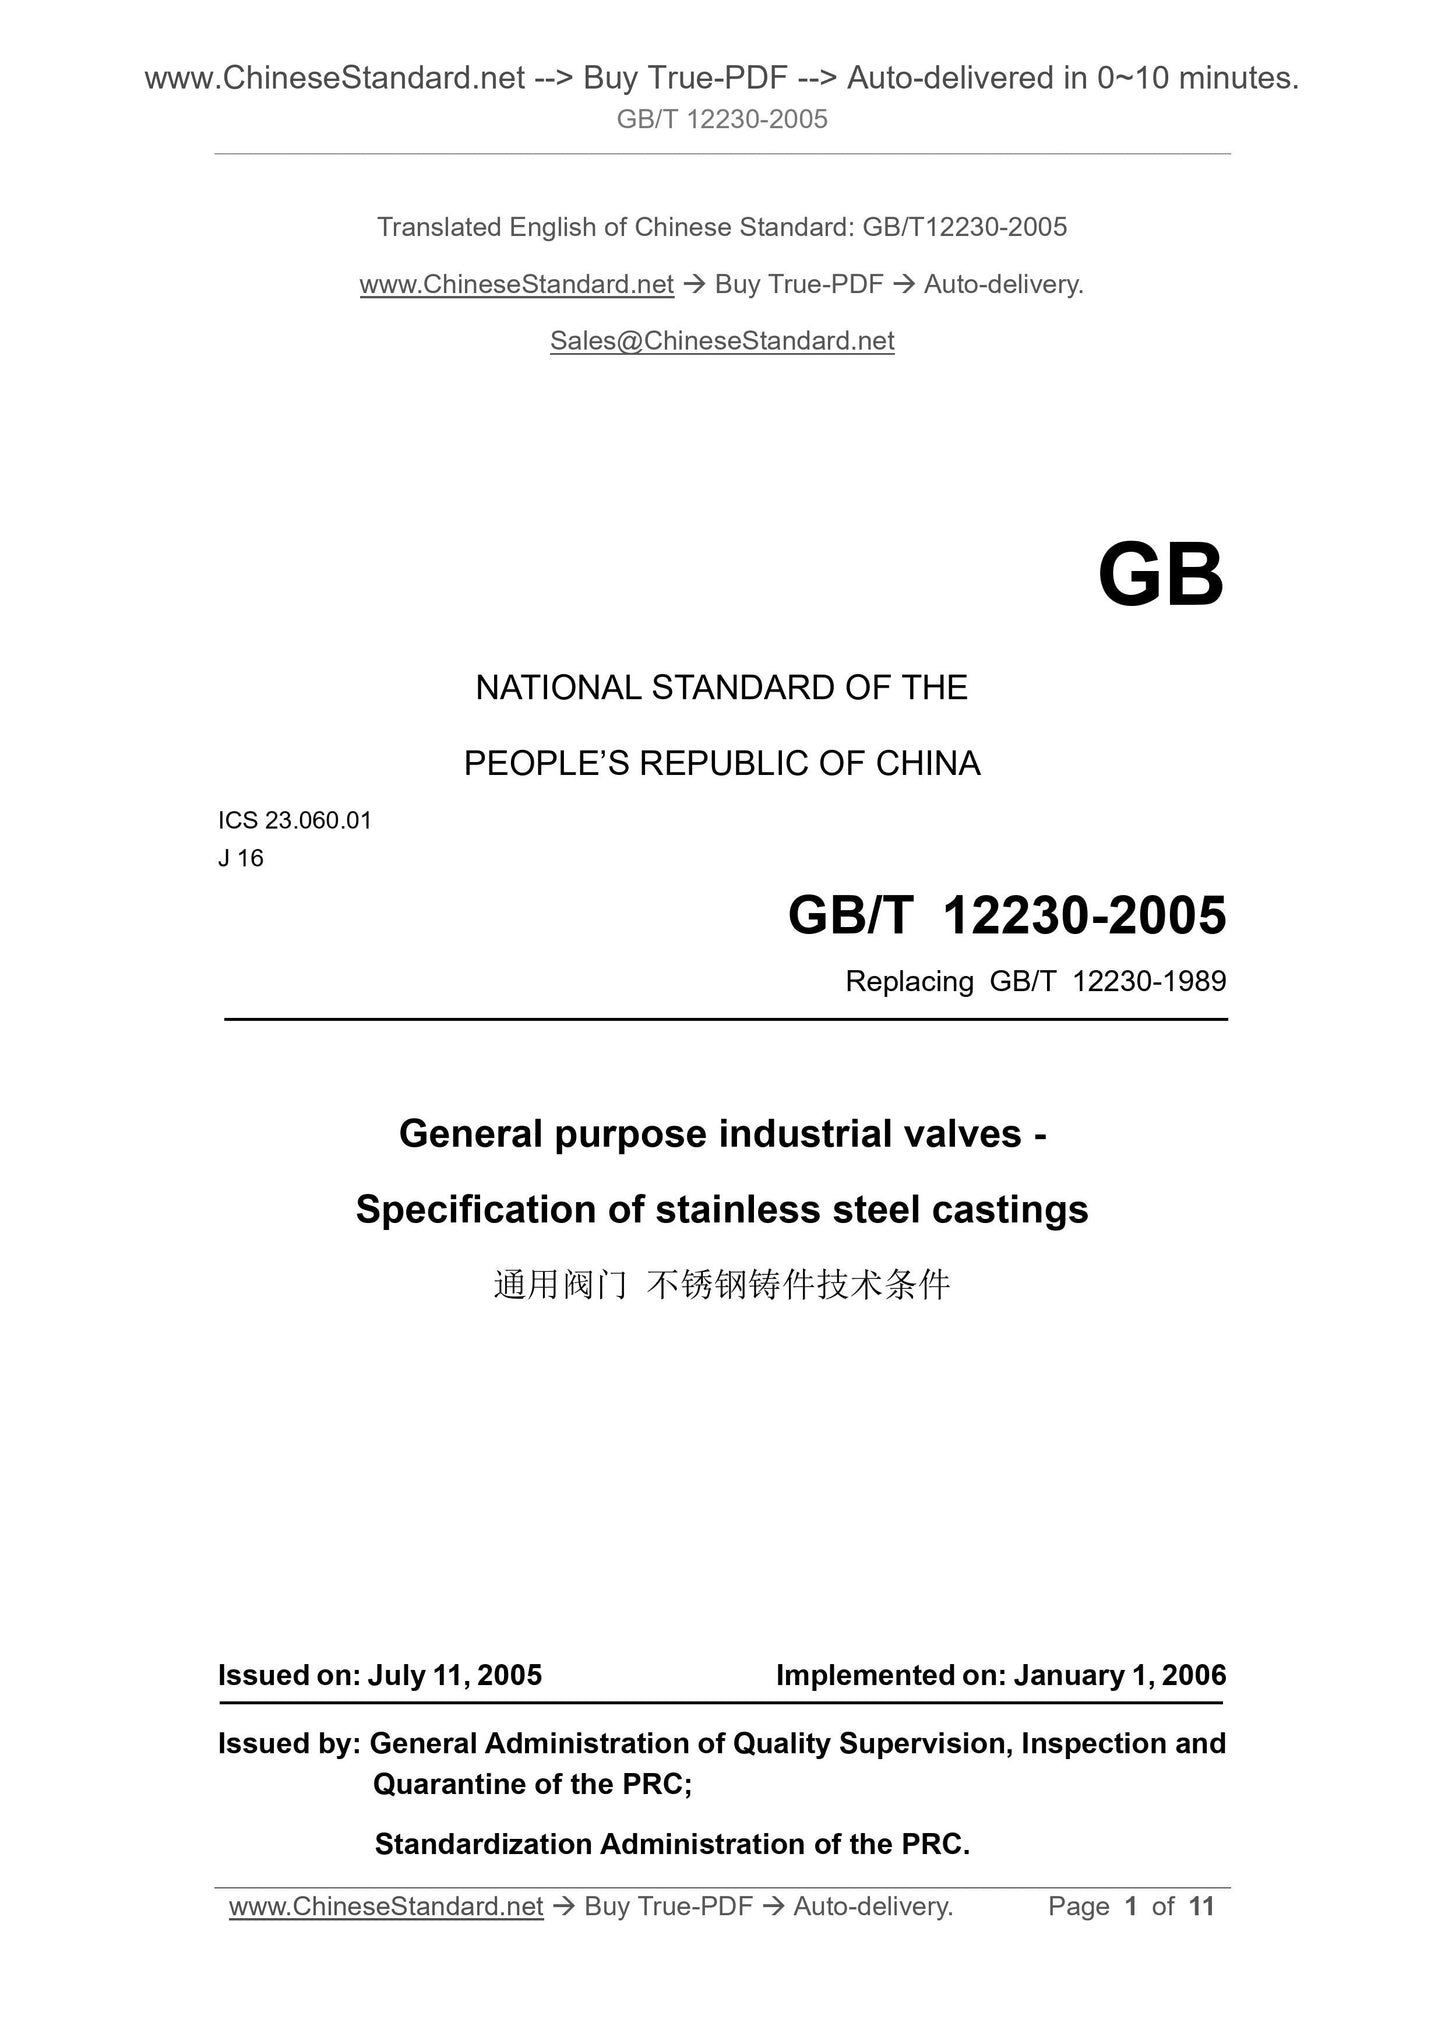 GB/T 12230-2005 Page 1